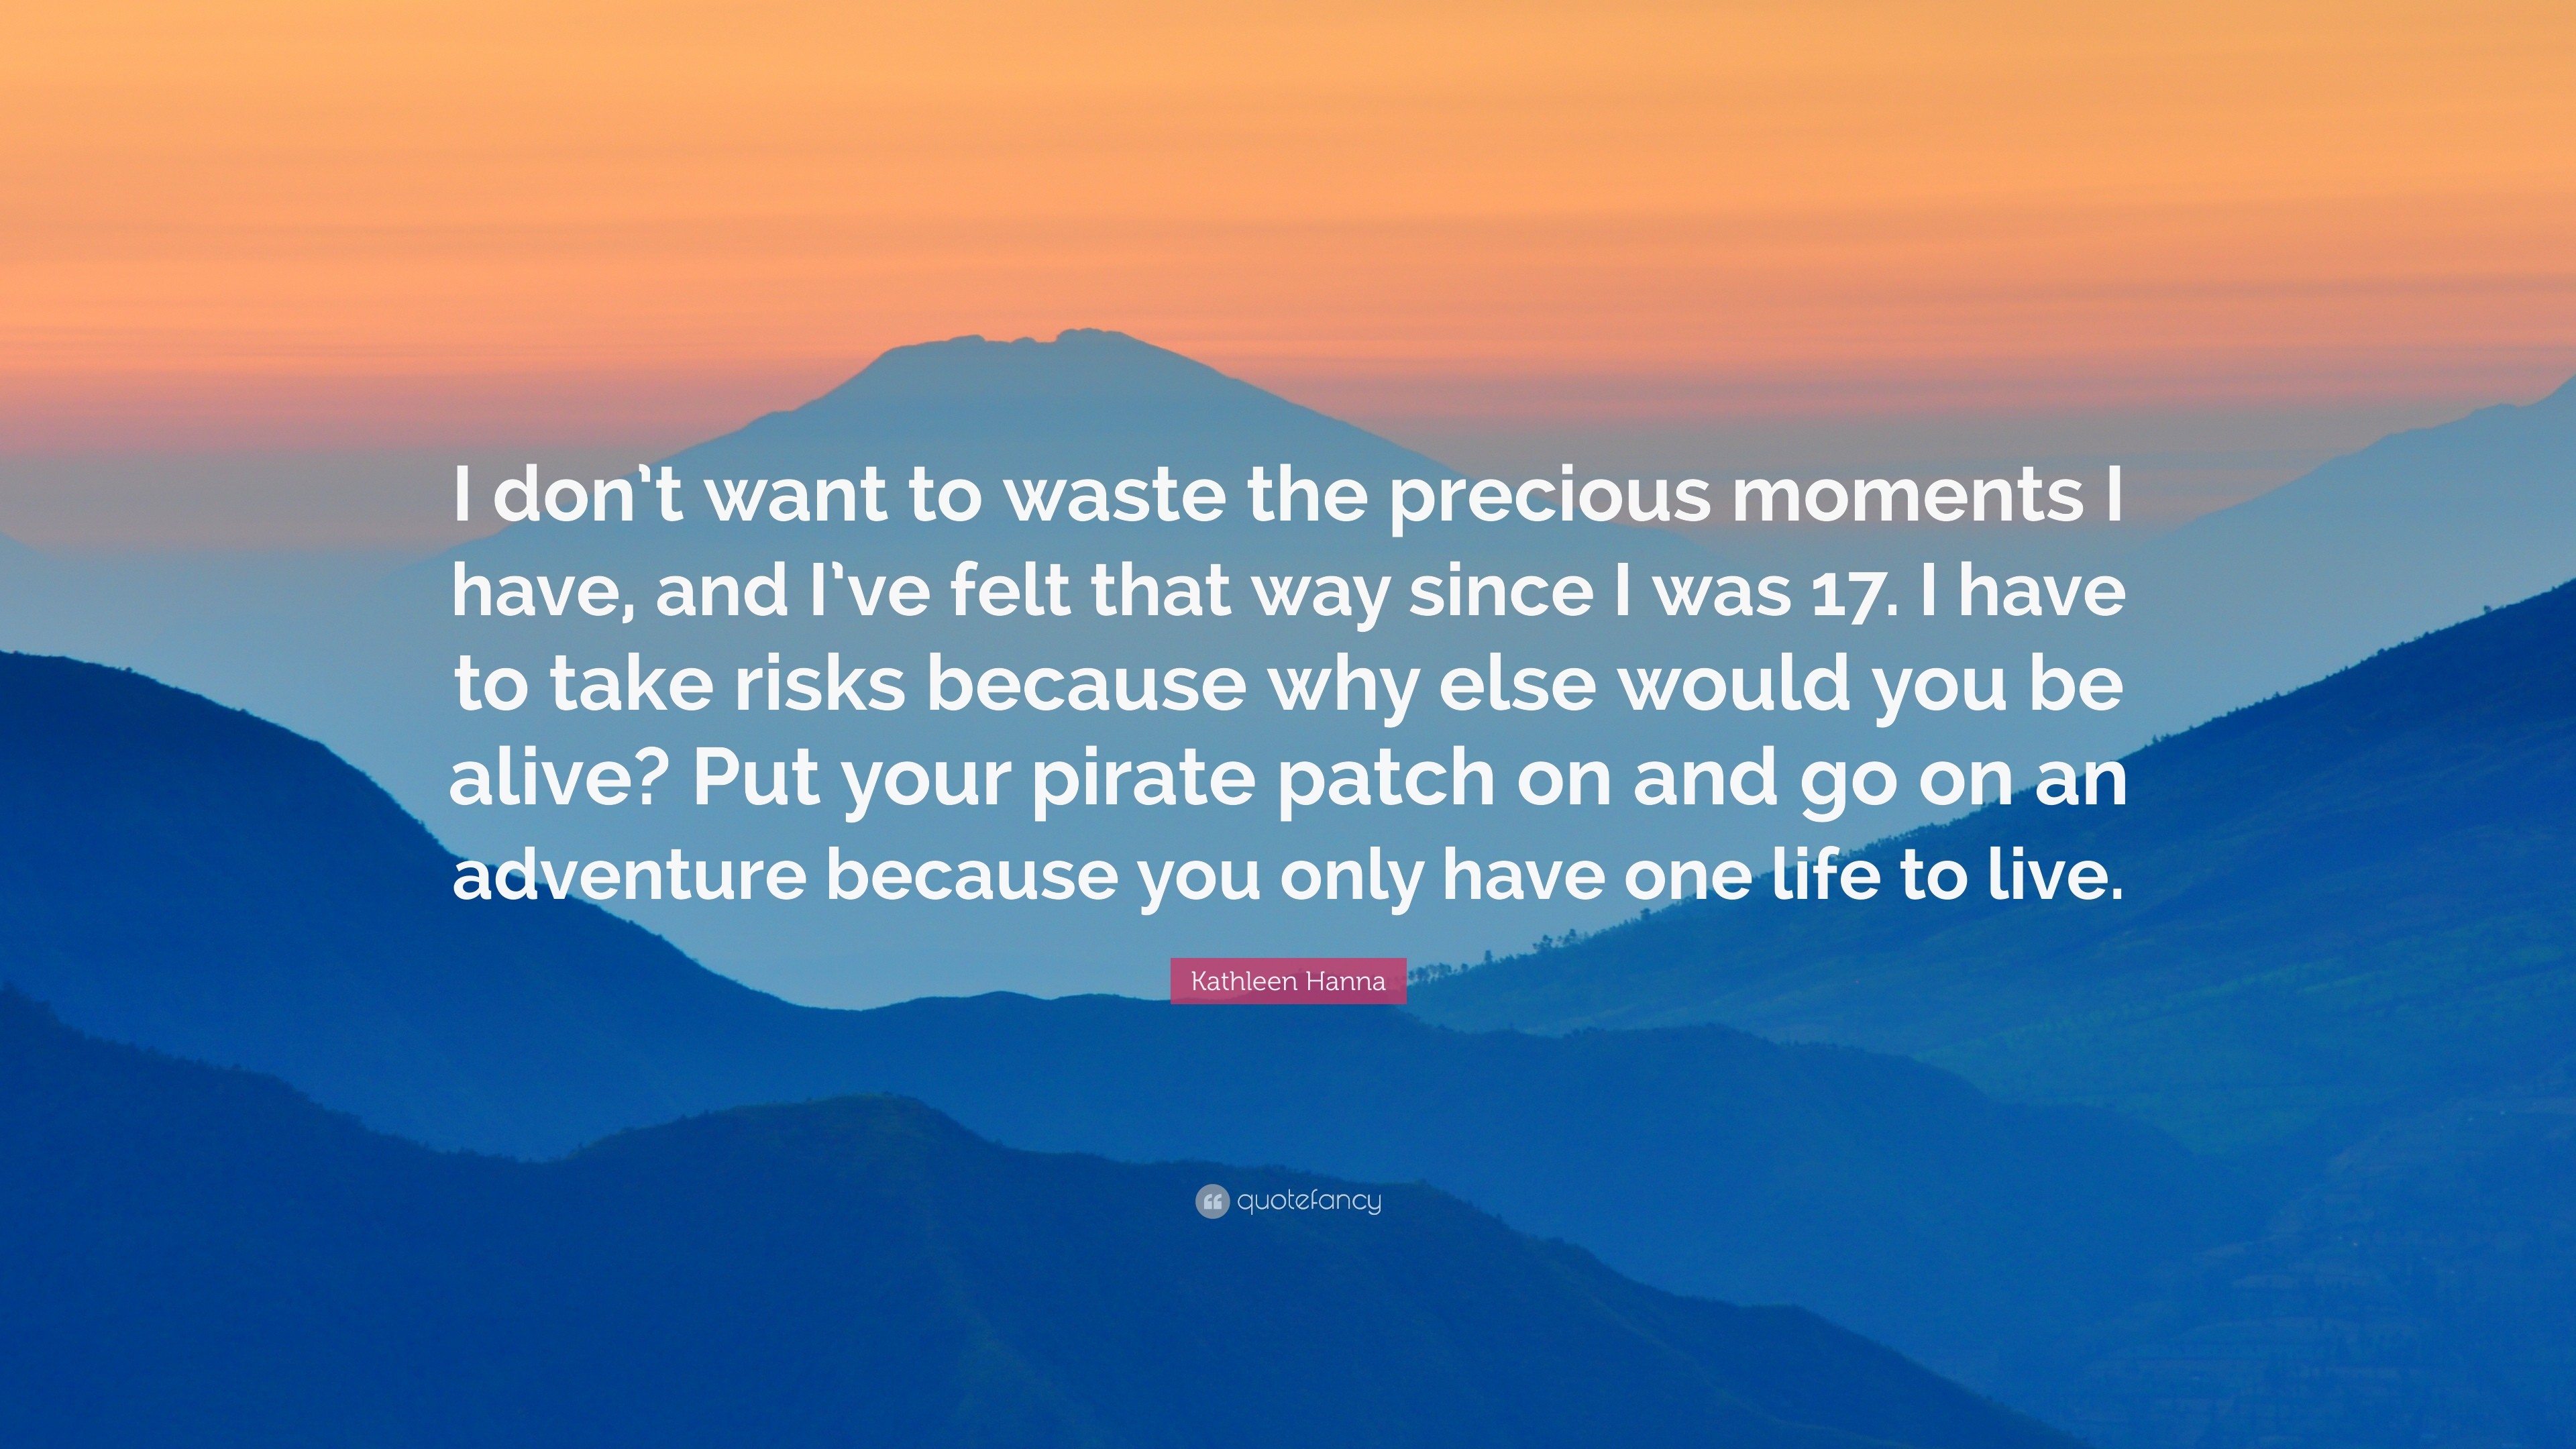 3840x2160 Kathleen Hanna Quote: “I don't want to waste the precious moments I